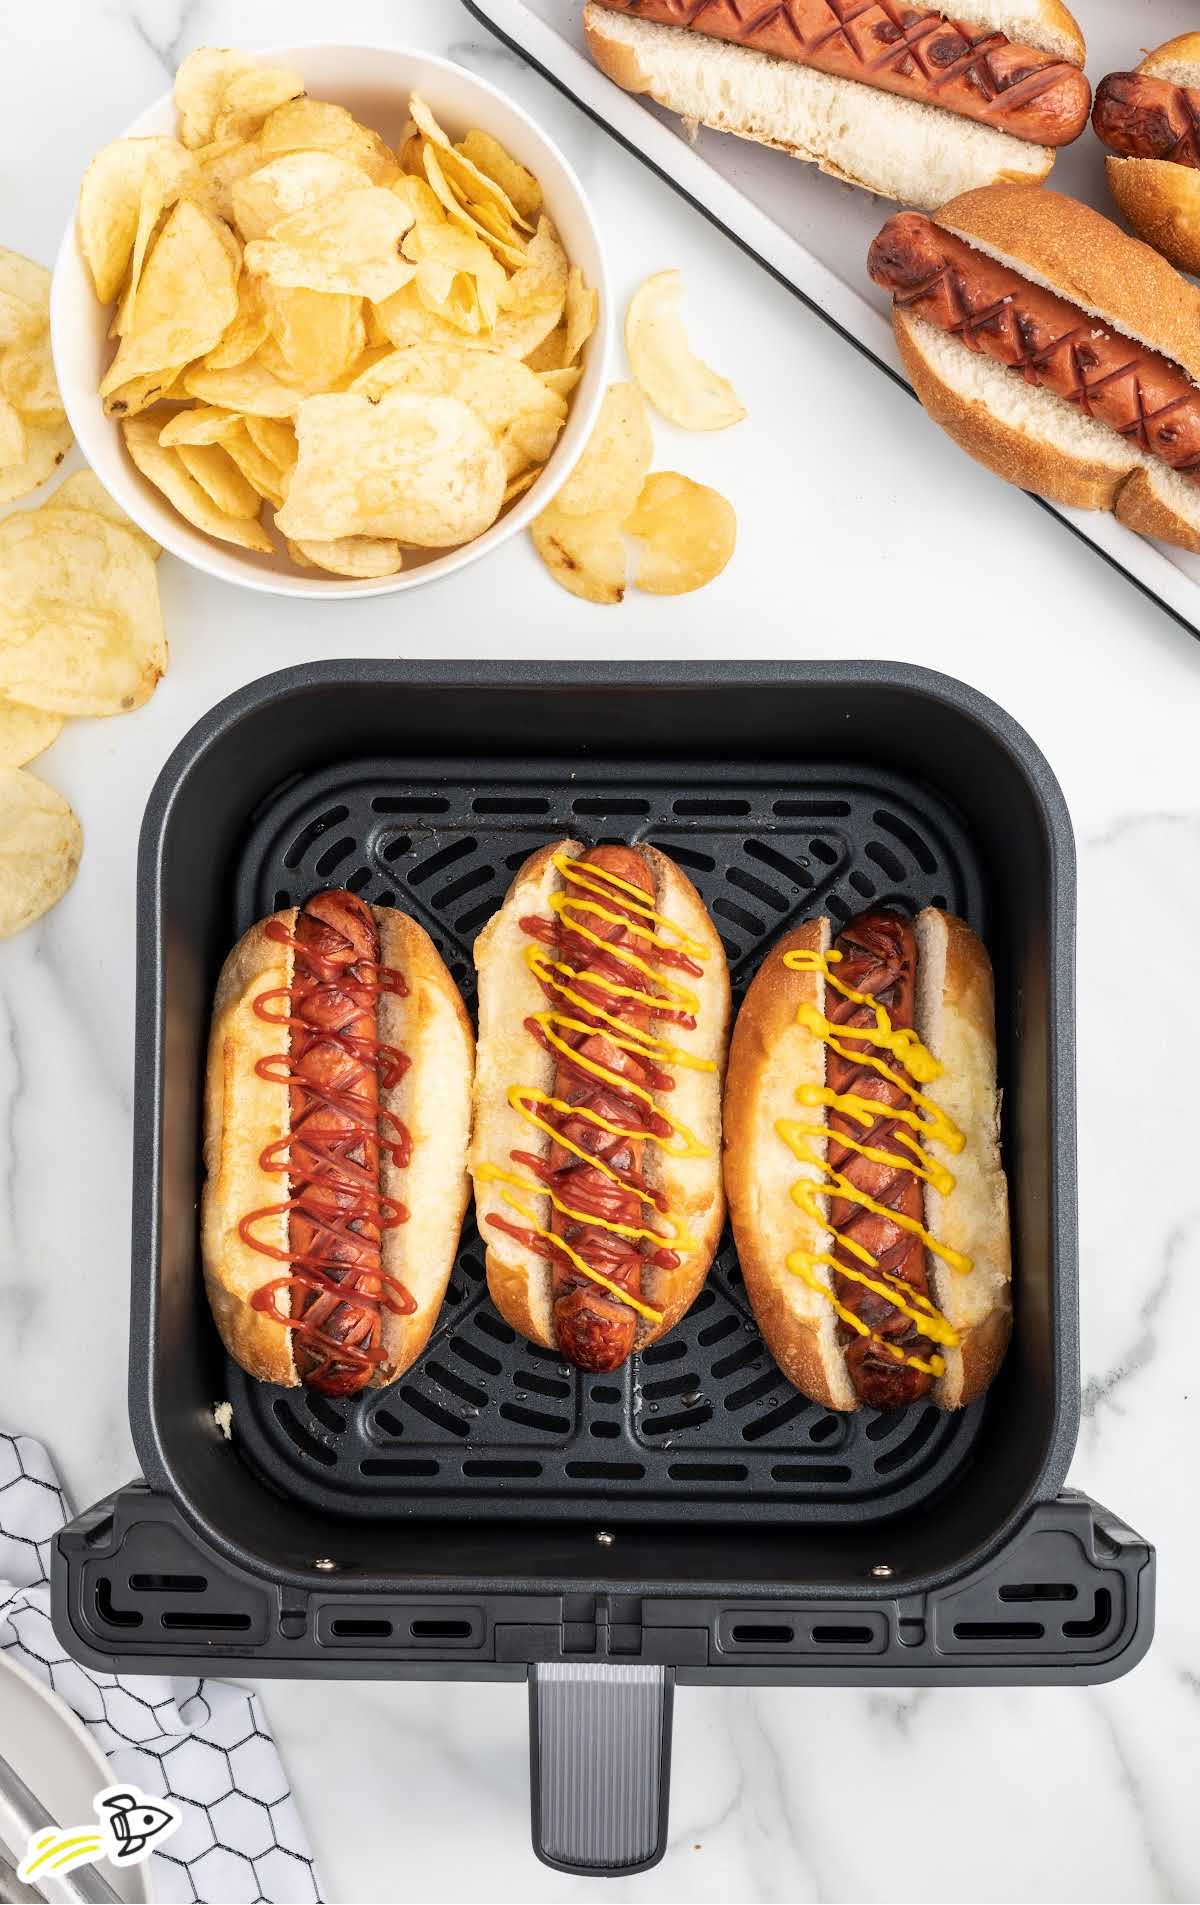 Hot Dogs topped with ketchup and mustard in an air fryer next to a bowl of chips